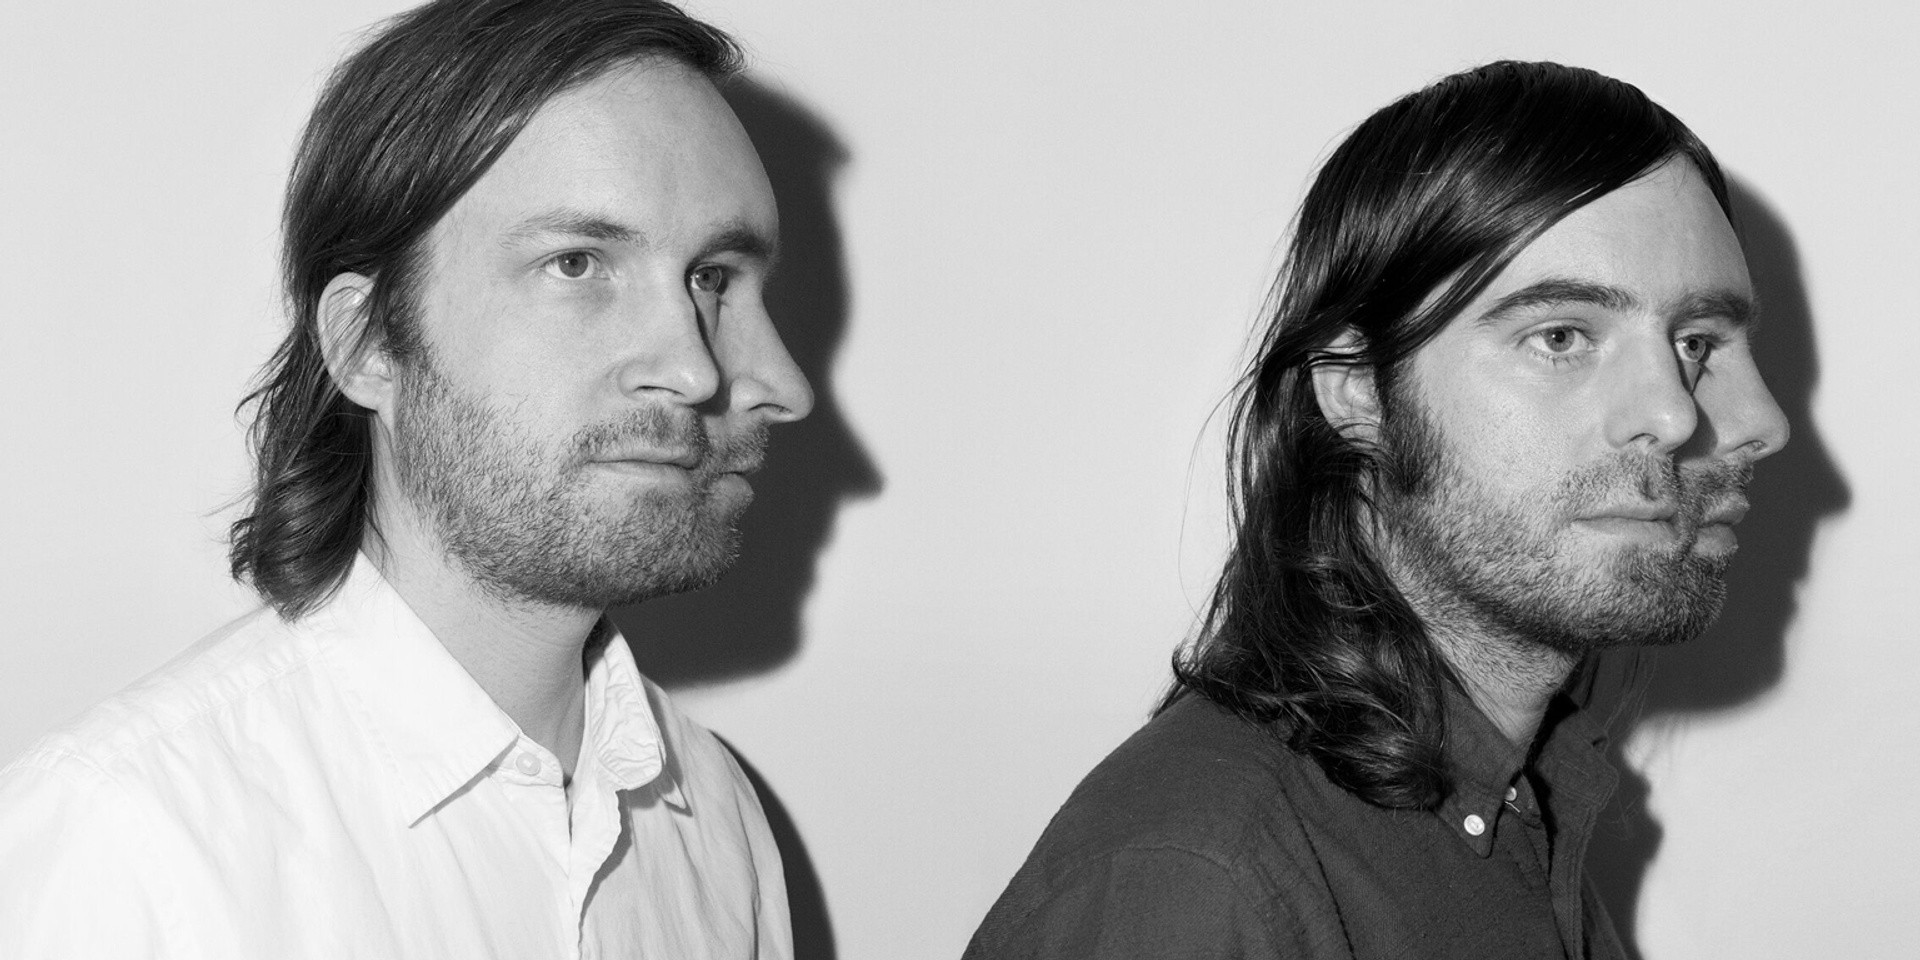 Ratatat: "We would definitely like to work with Travis Scott and Young Thug."